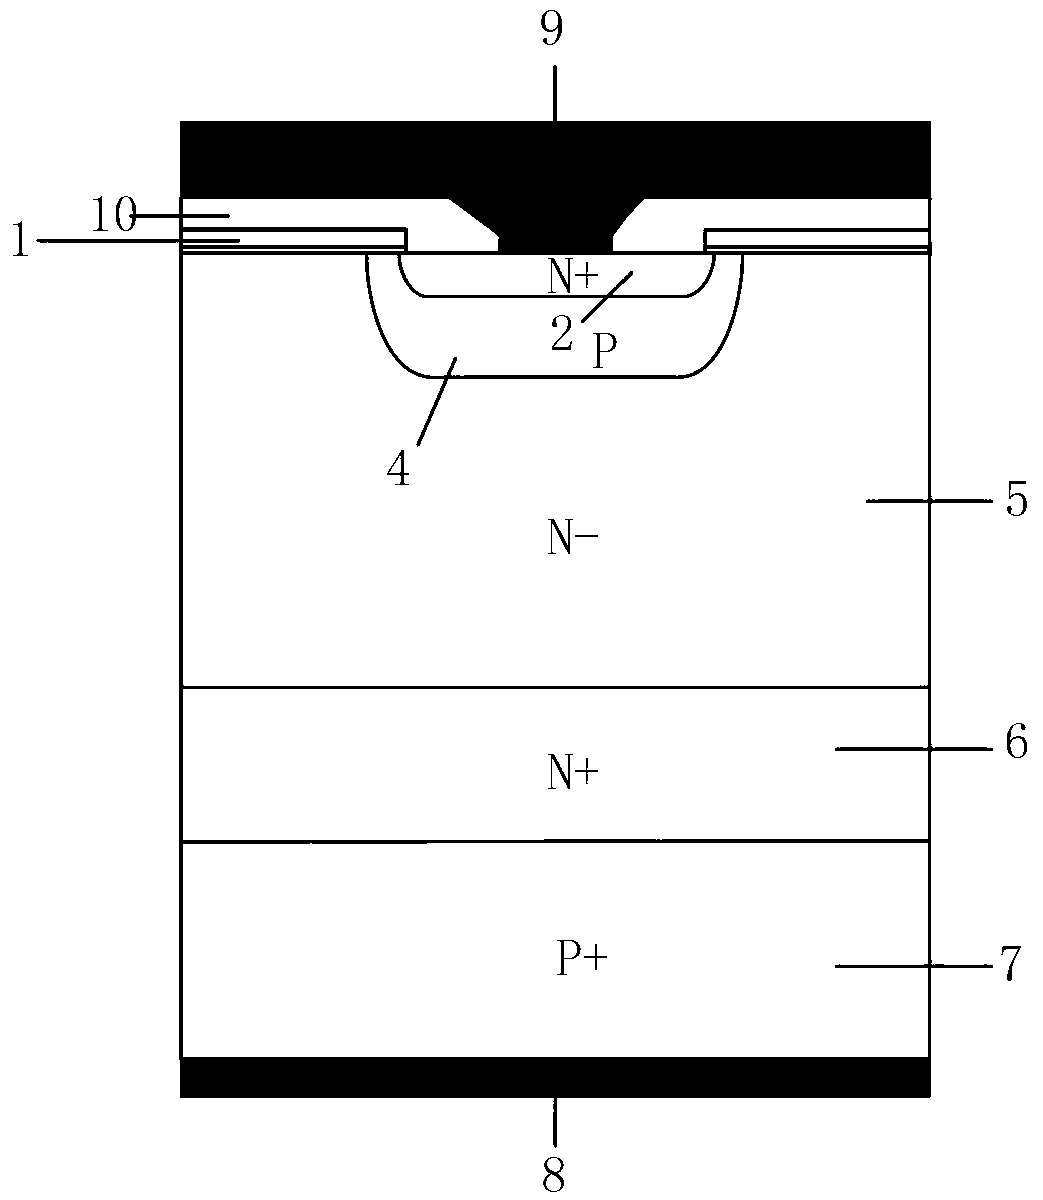 Insulated gate bipolar transistor (IGBT) device with positive temperature coefficient emitter ballast resistance